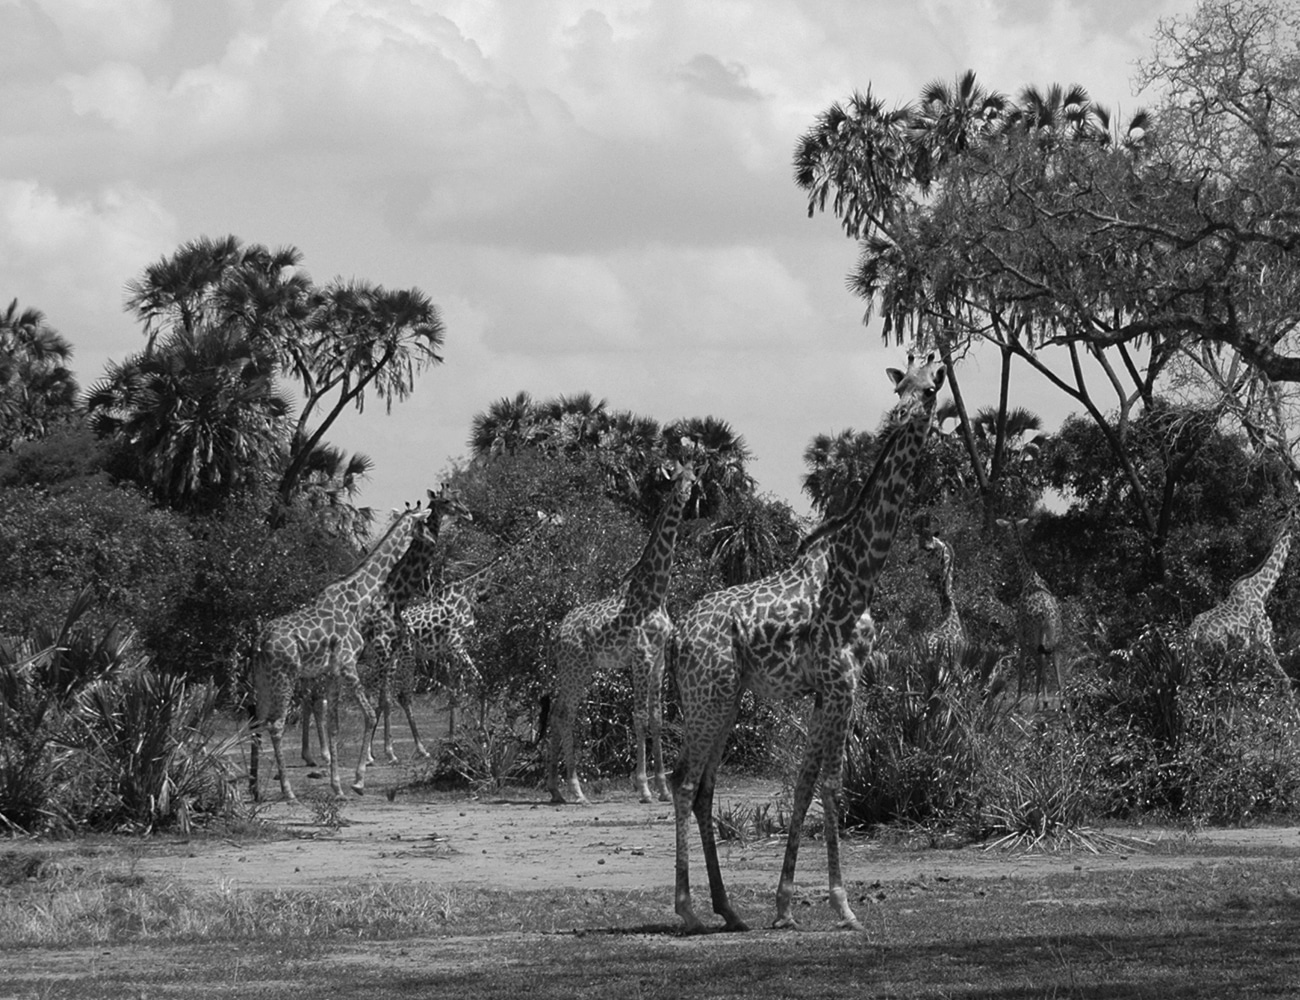 Animals at Selous Game Reserve